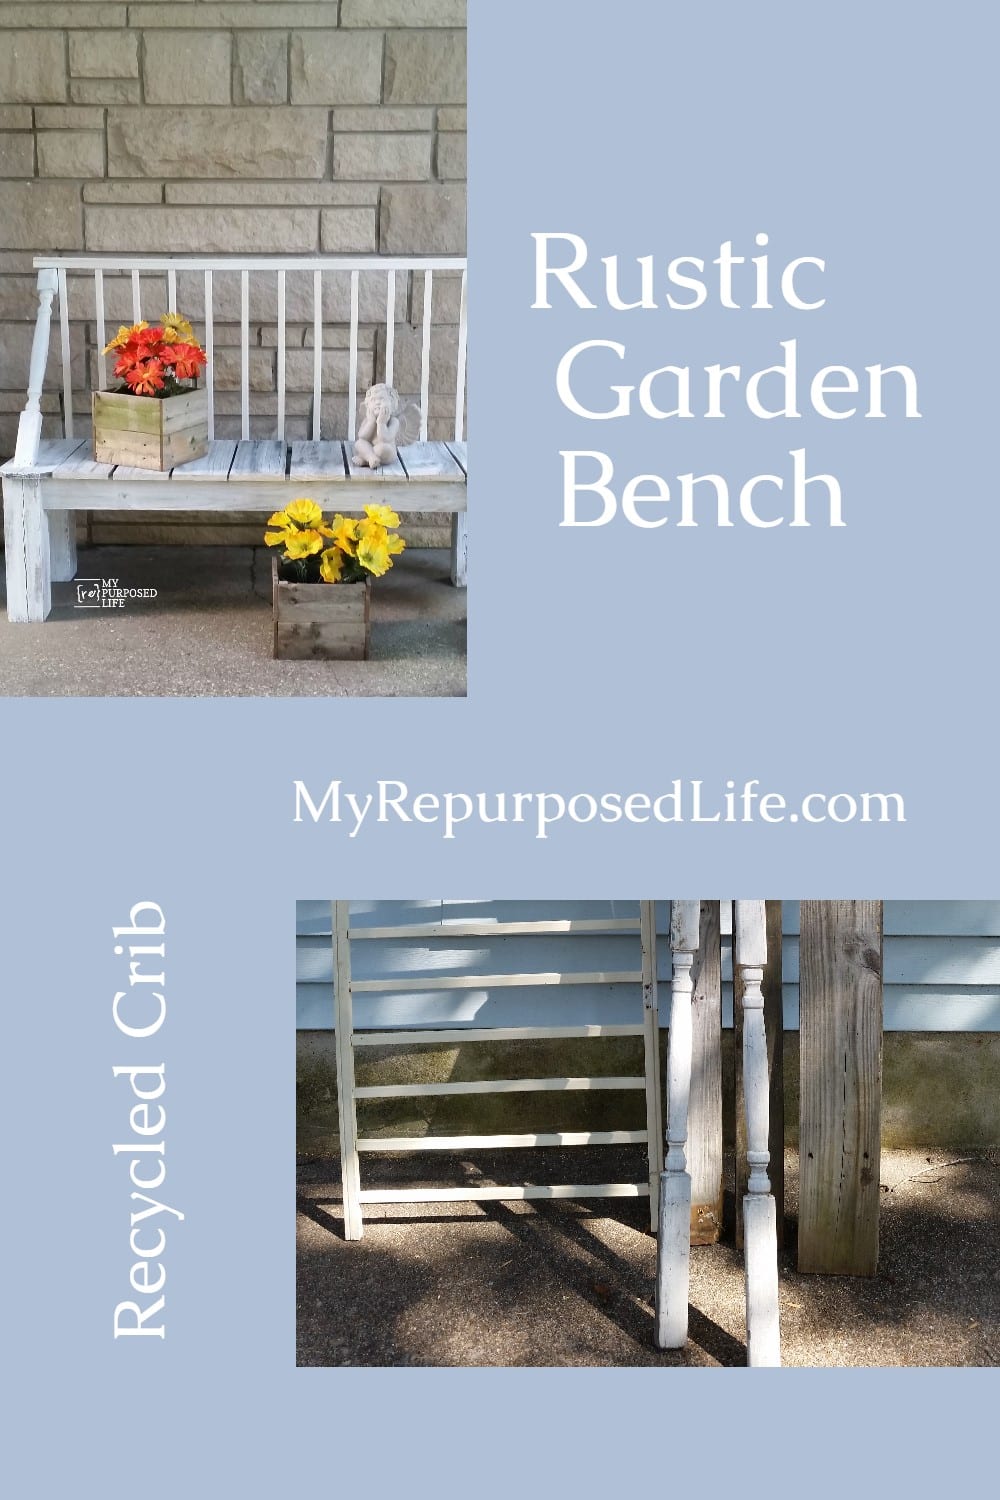 Using reclaimed spindles, crib rails and fence boards--it was easy to make this crib garden bench. Awesome outdoor garden bench costing very little. Complete directions to make your own. #MyRepurposedLife #repurposed #furniture #outdoors #garden #bench via @repurposedlife